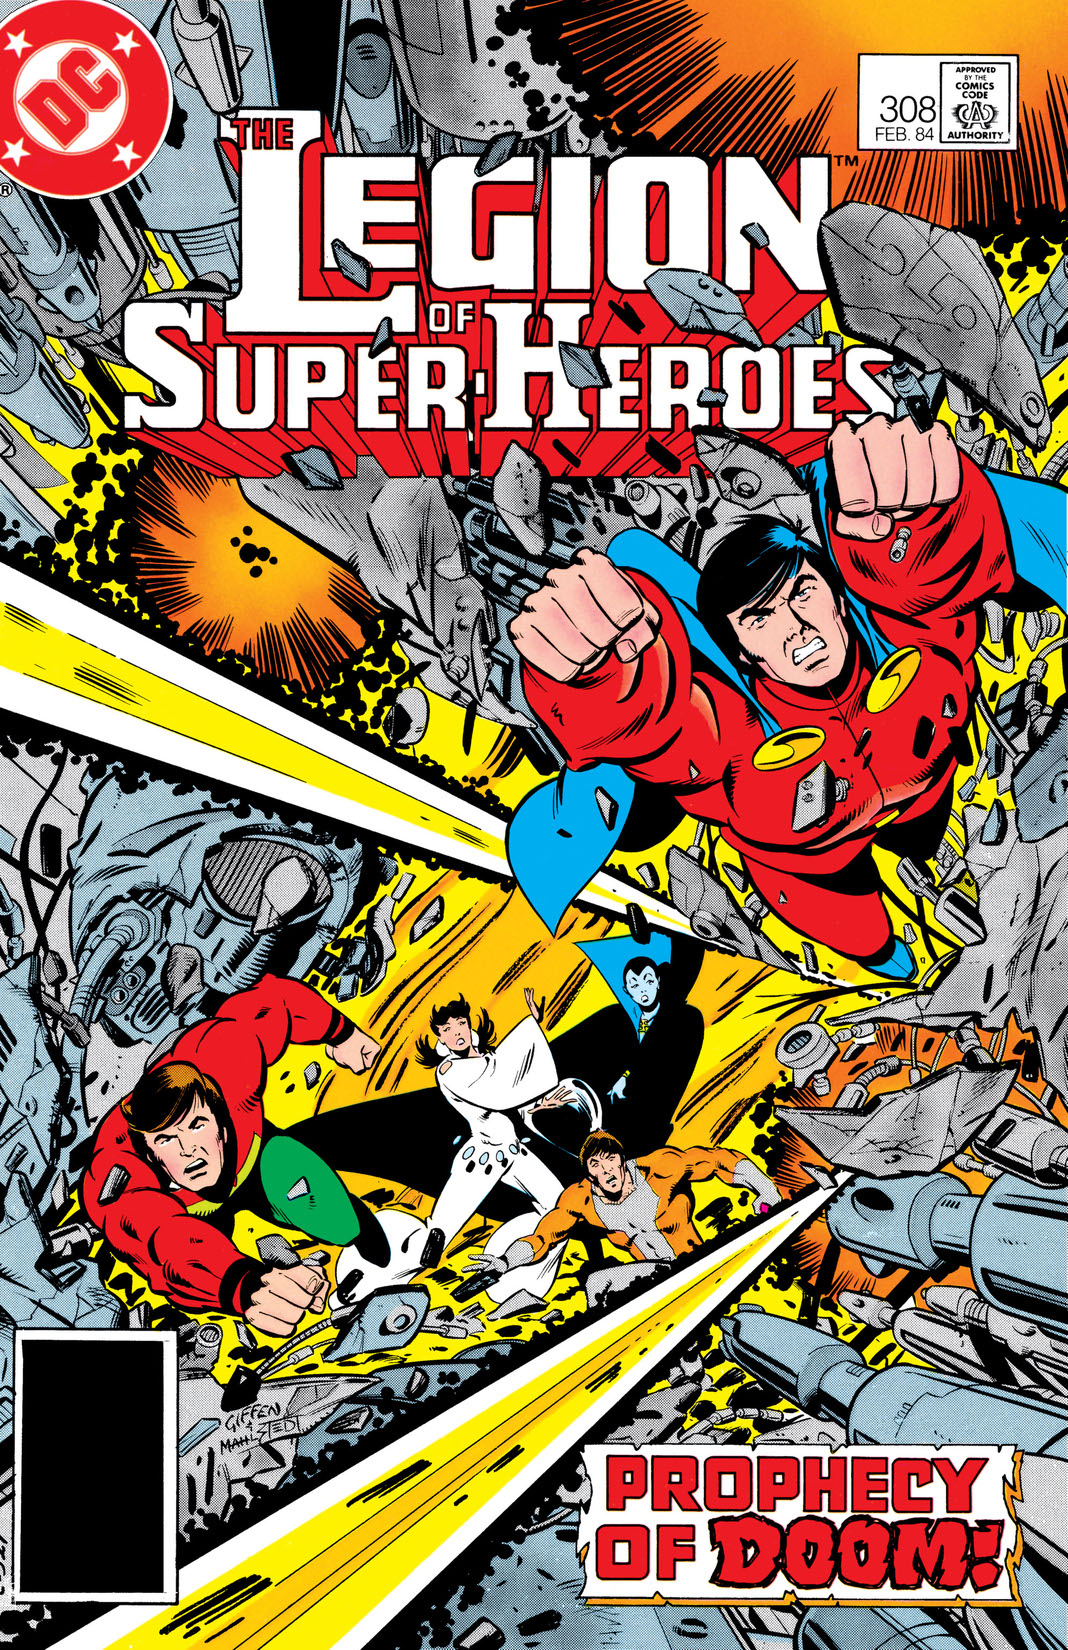 The Legion of Super-Heroes (1980-) #308 preview images